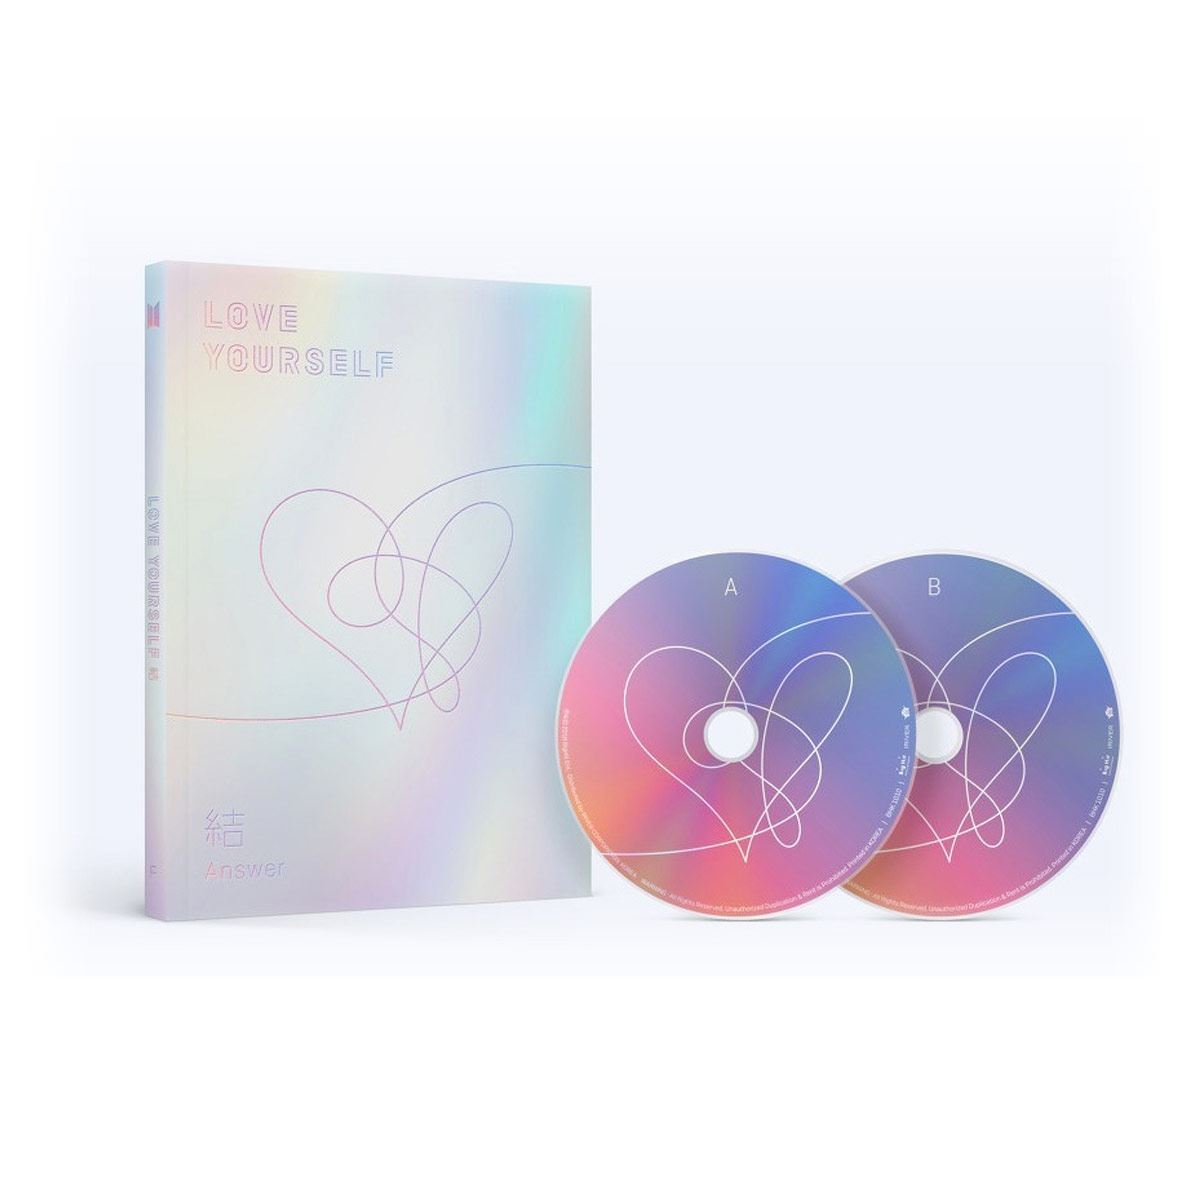 2 CDs BTS - Love Yourself: Answer